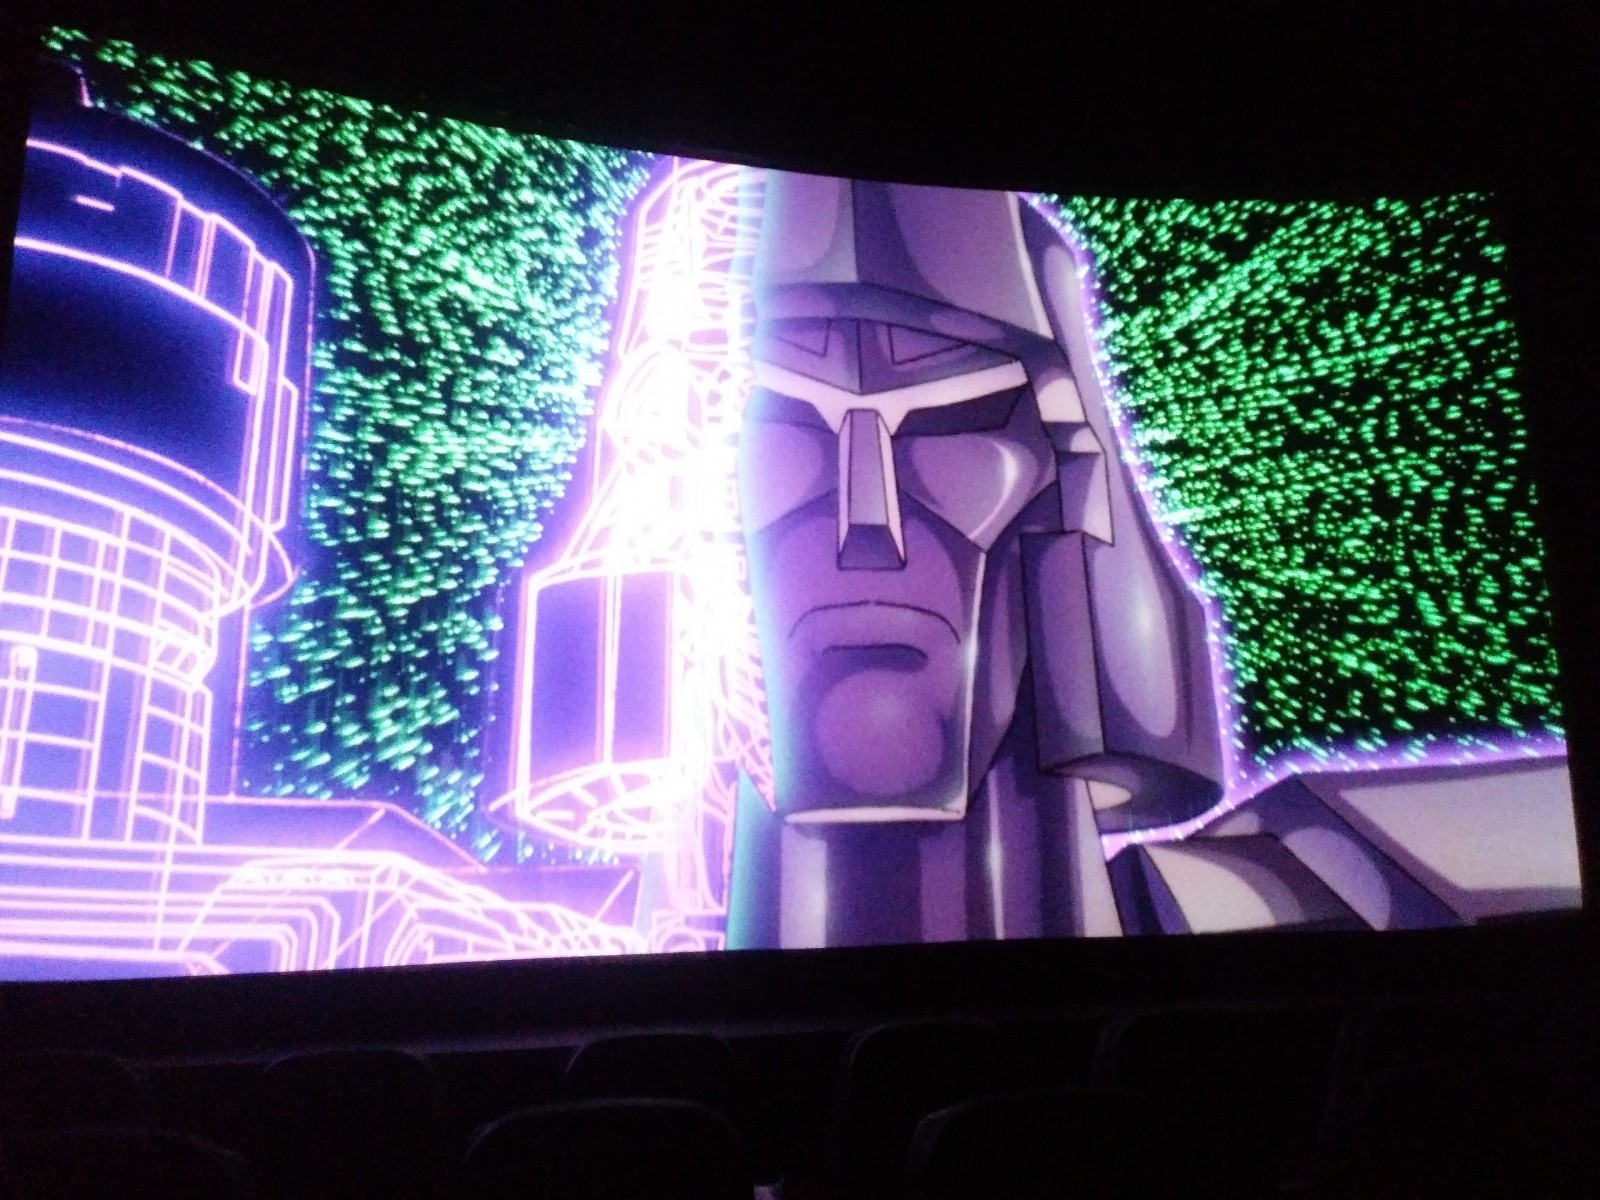 Transformers News: Review of 2018 Big Screen Showing of 1986 Transformers Film with Bumblebee Movie Sneak Peek